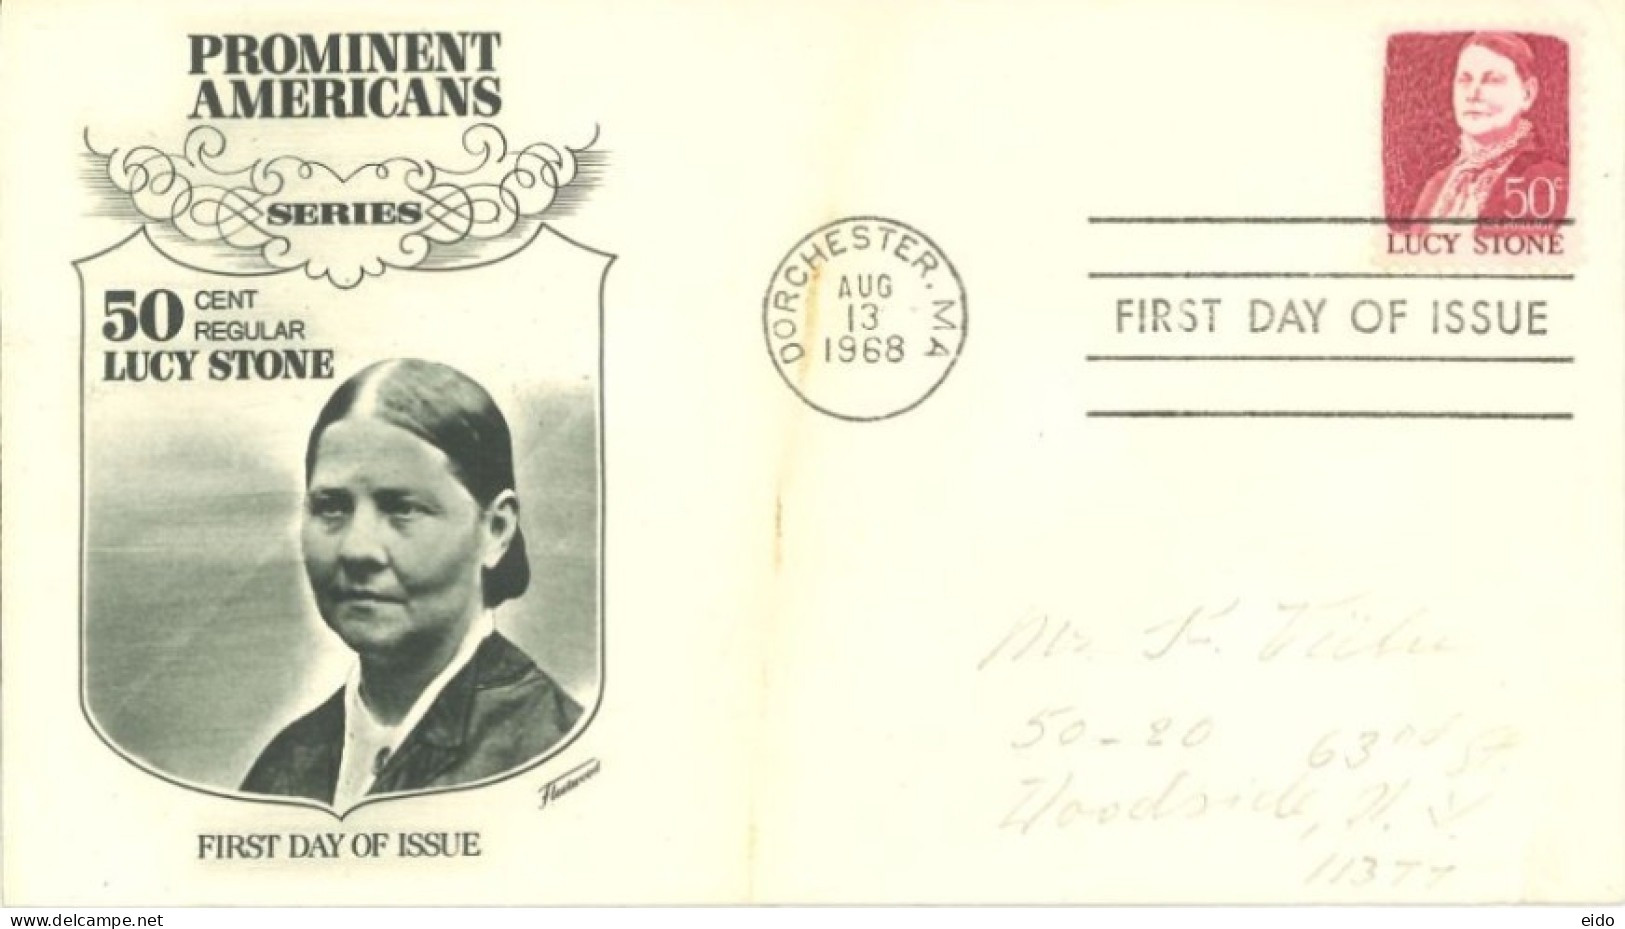 U.S.A.. -1968 -  FDC STAMP OF PROMINENT AMERICANS SERIES, LUCY STONE SENT TO NEW YORK. - Brieven En Documenten